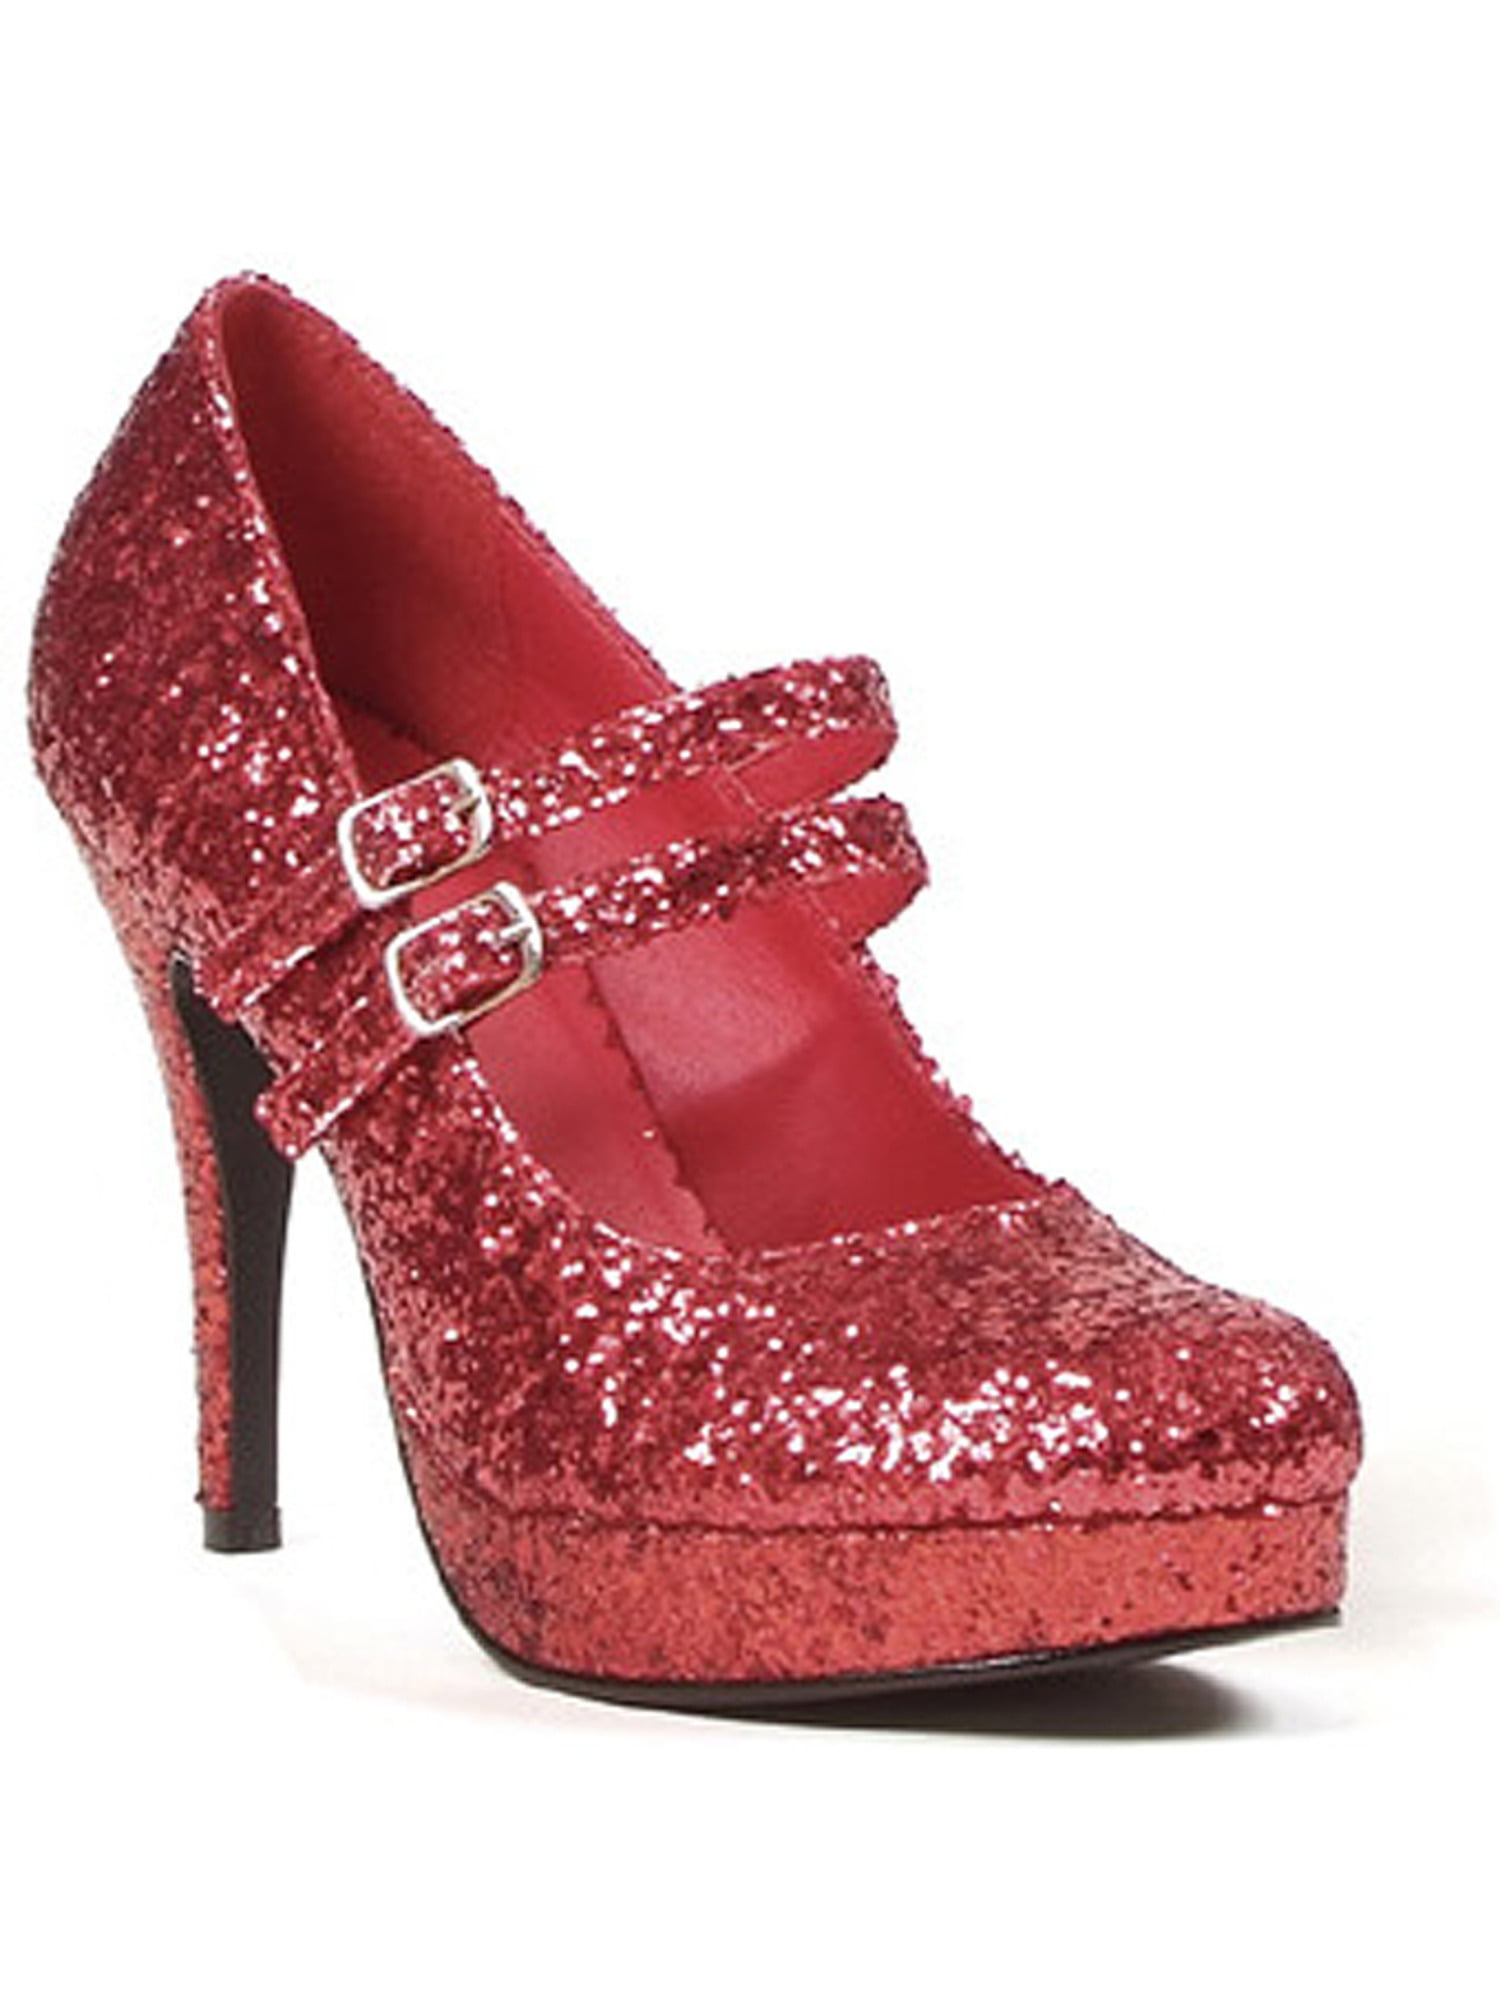 Womens Red Glitter Pumps Mary Jane Strap 4 Inch Heels Costume Theatre ...